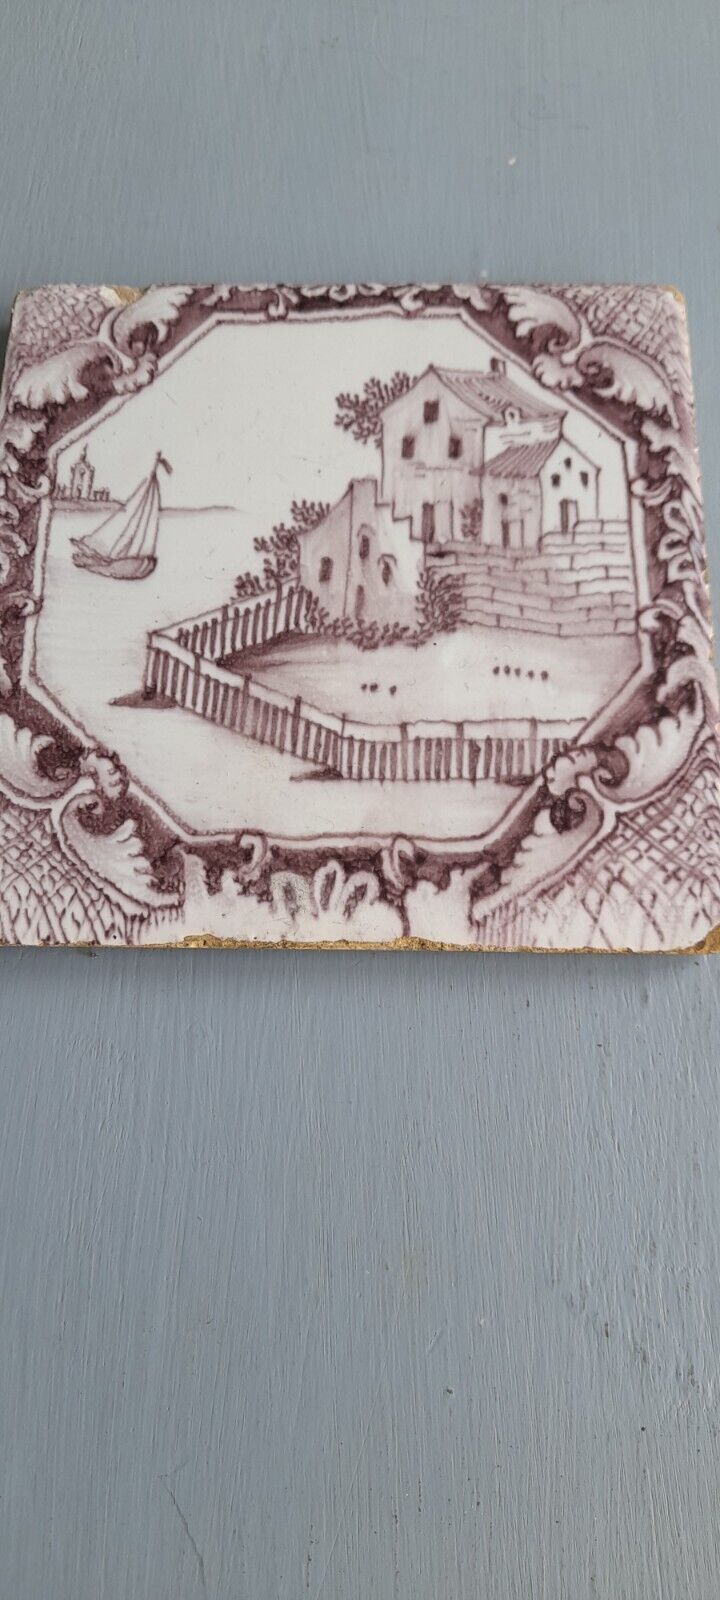 ANTIQUE 18TH CNTURY DELFT TILE MANGANESE HOUSE AND RIVER SCENE APPROX 5 INCH